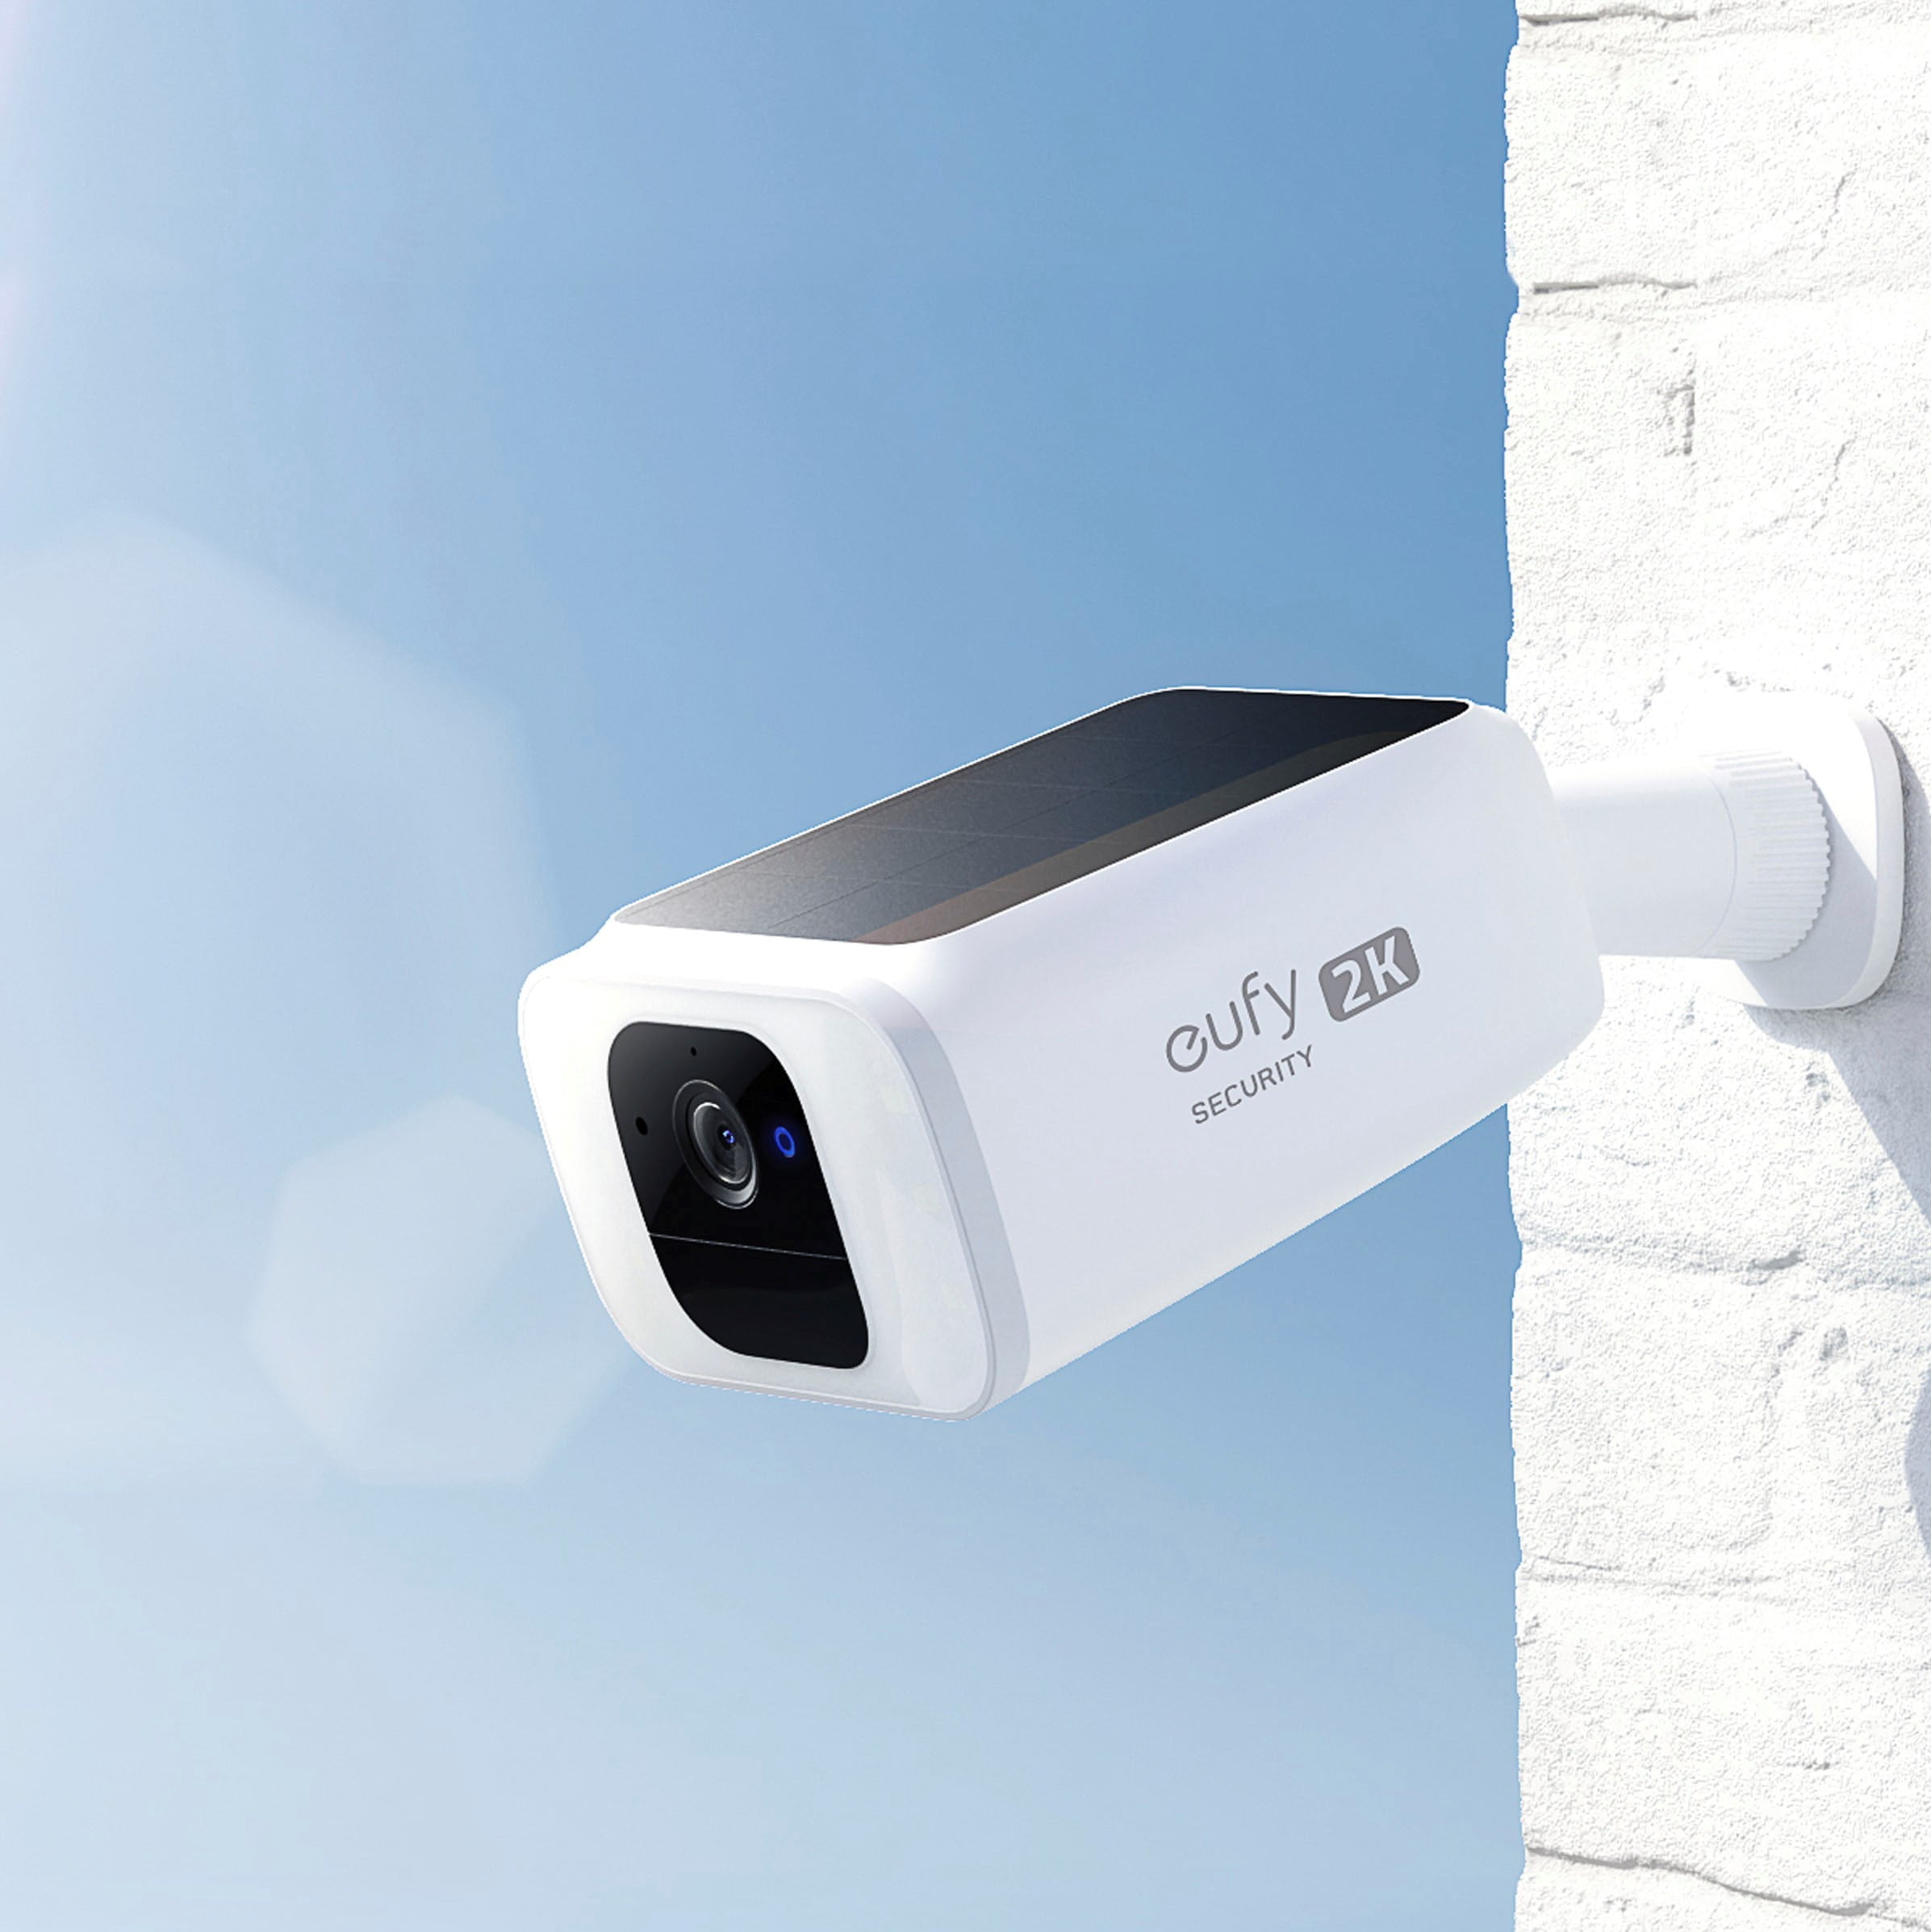 eufy Security Launches the First All-in-One Solar Power Wireless Outdoor  Security Camera in the UAE - Teletimes International